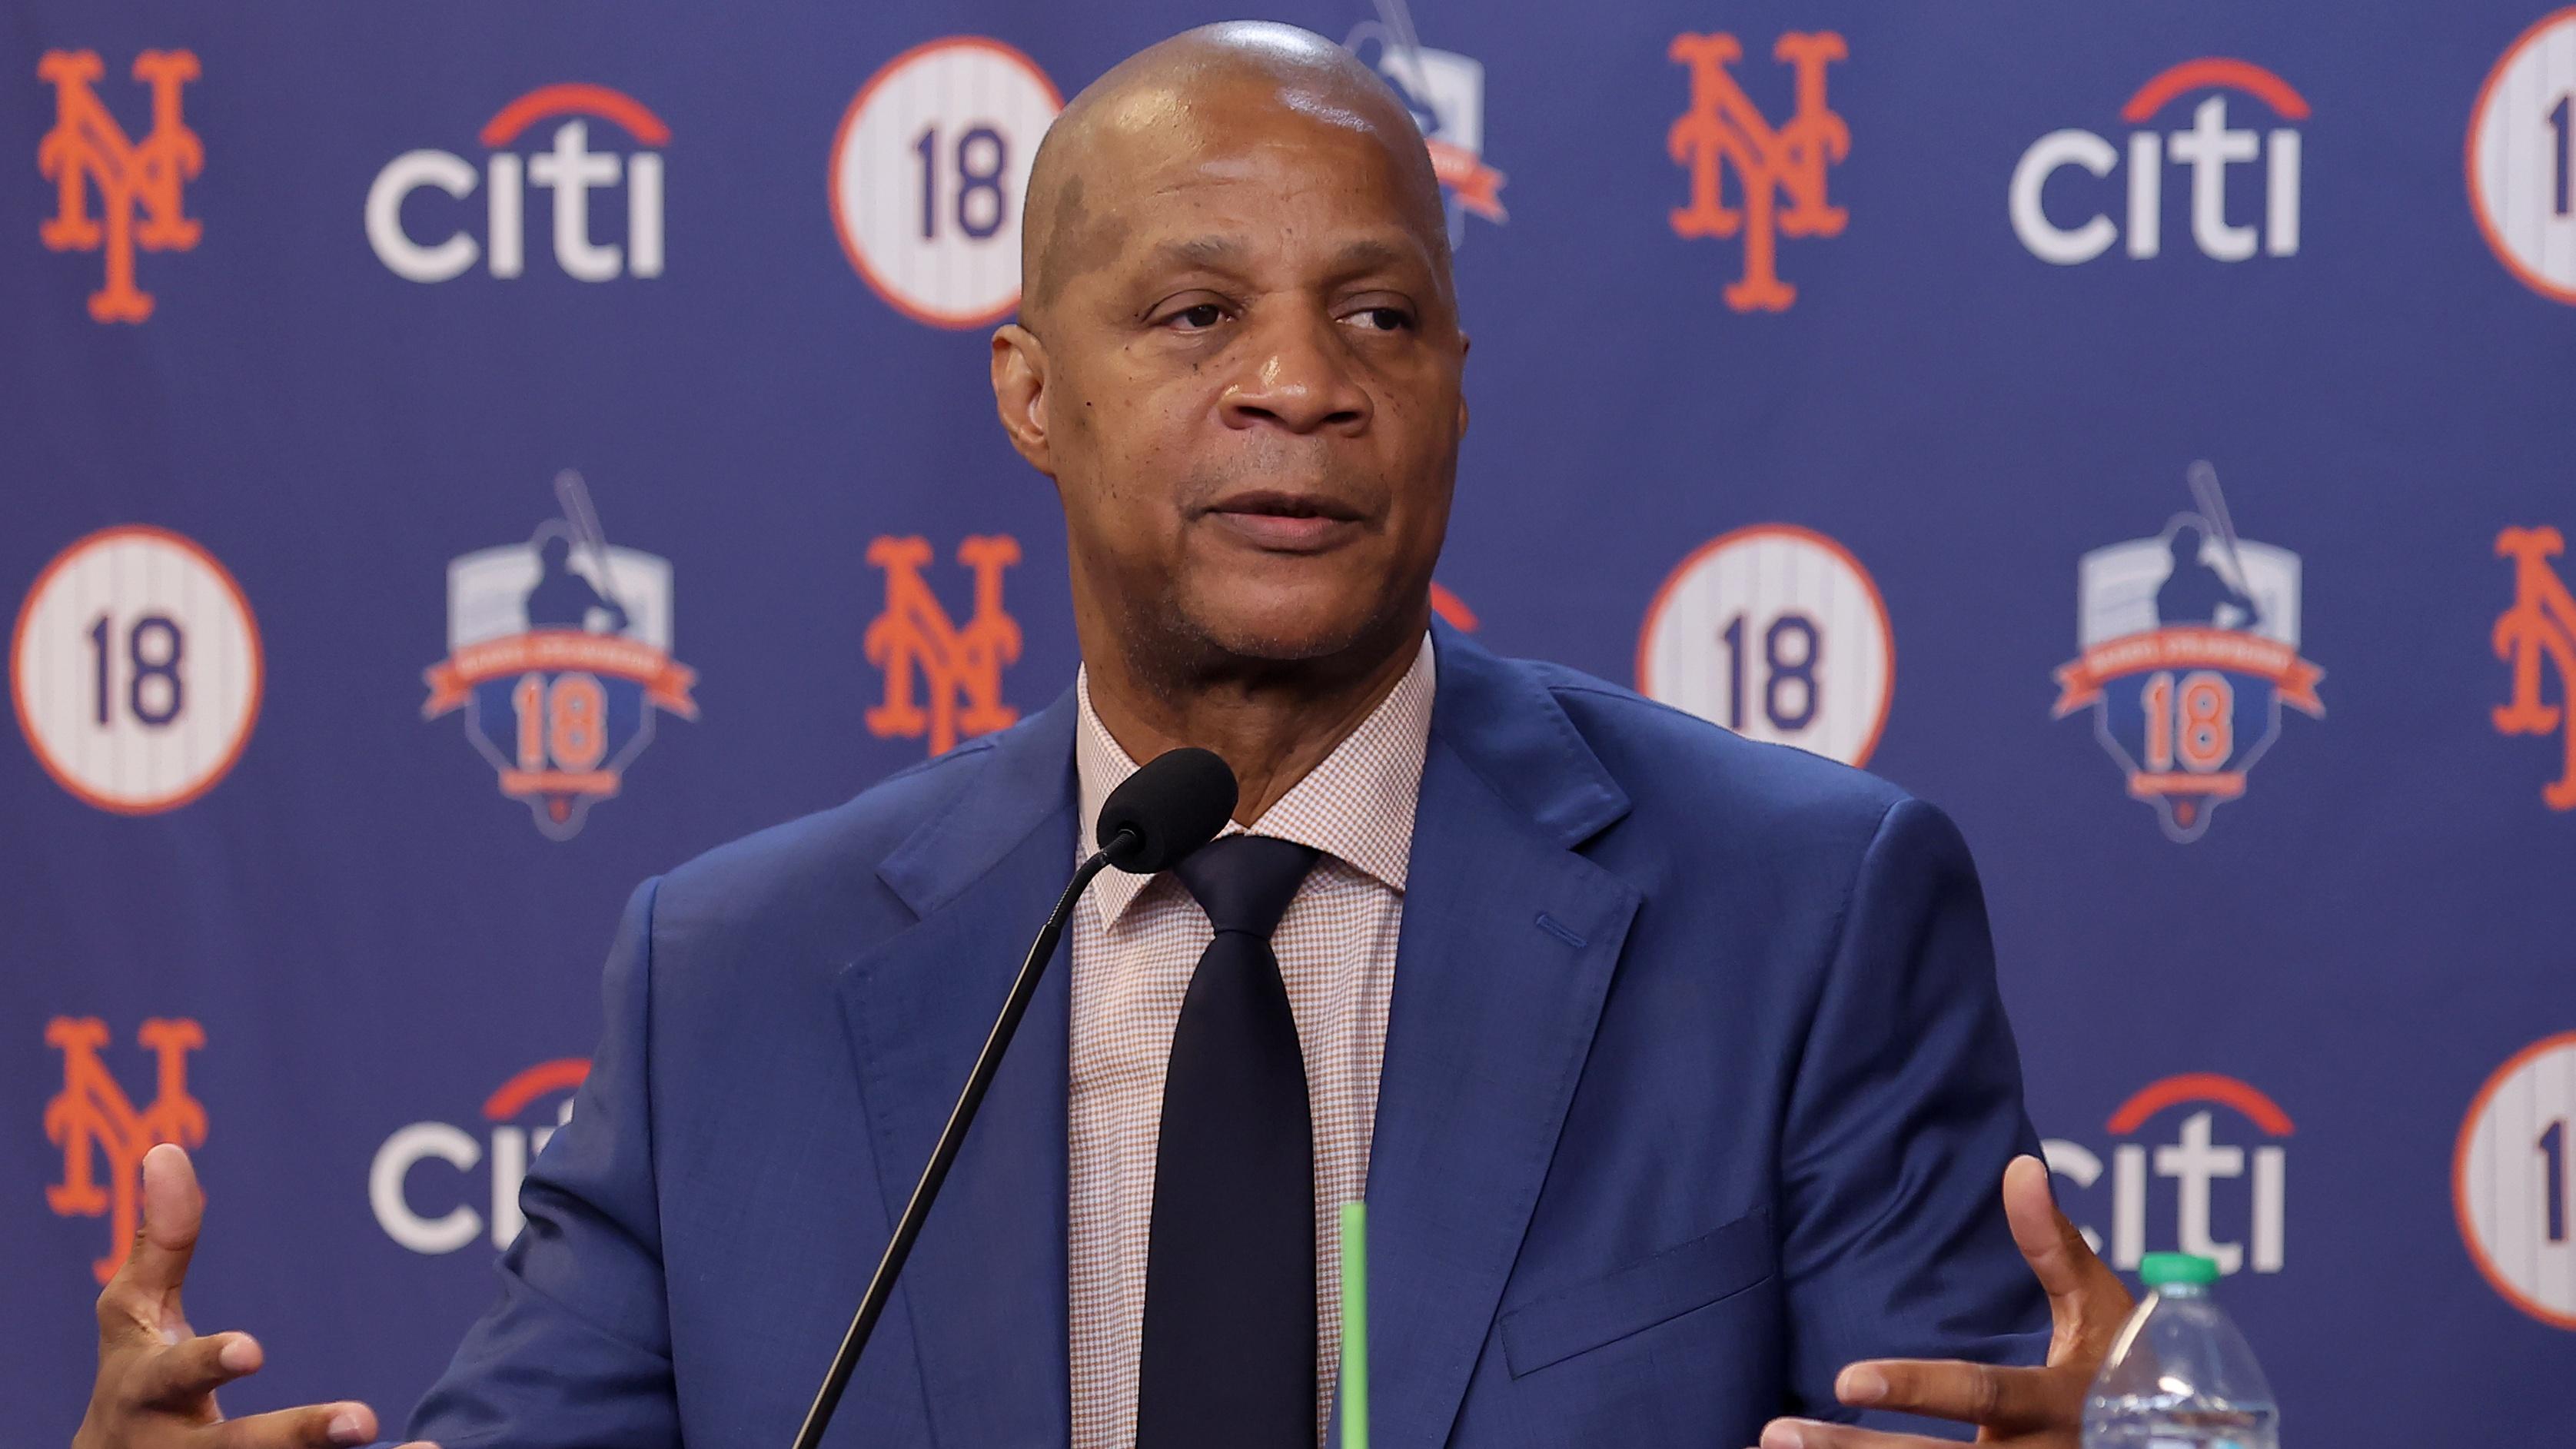 New York Mets former player Darryl Strawberry speaks during a press conference at Citi Field before his number is retired by the team in a ceremony before a game against the Arizona Diamondbacks / Brad Penner - USA TODAY Sports